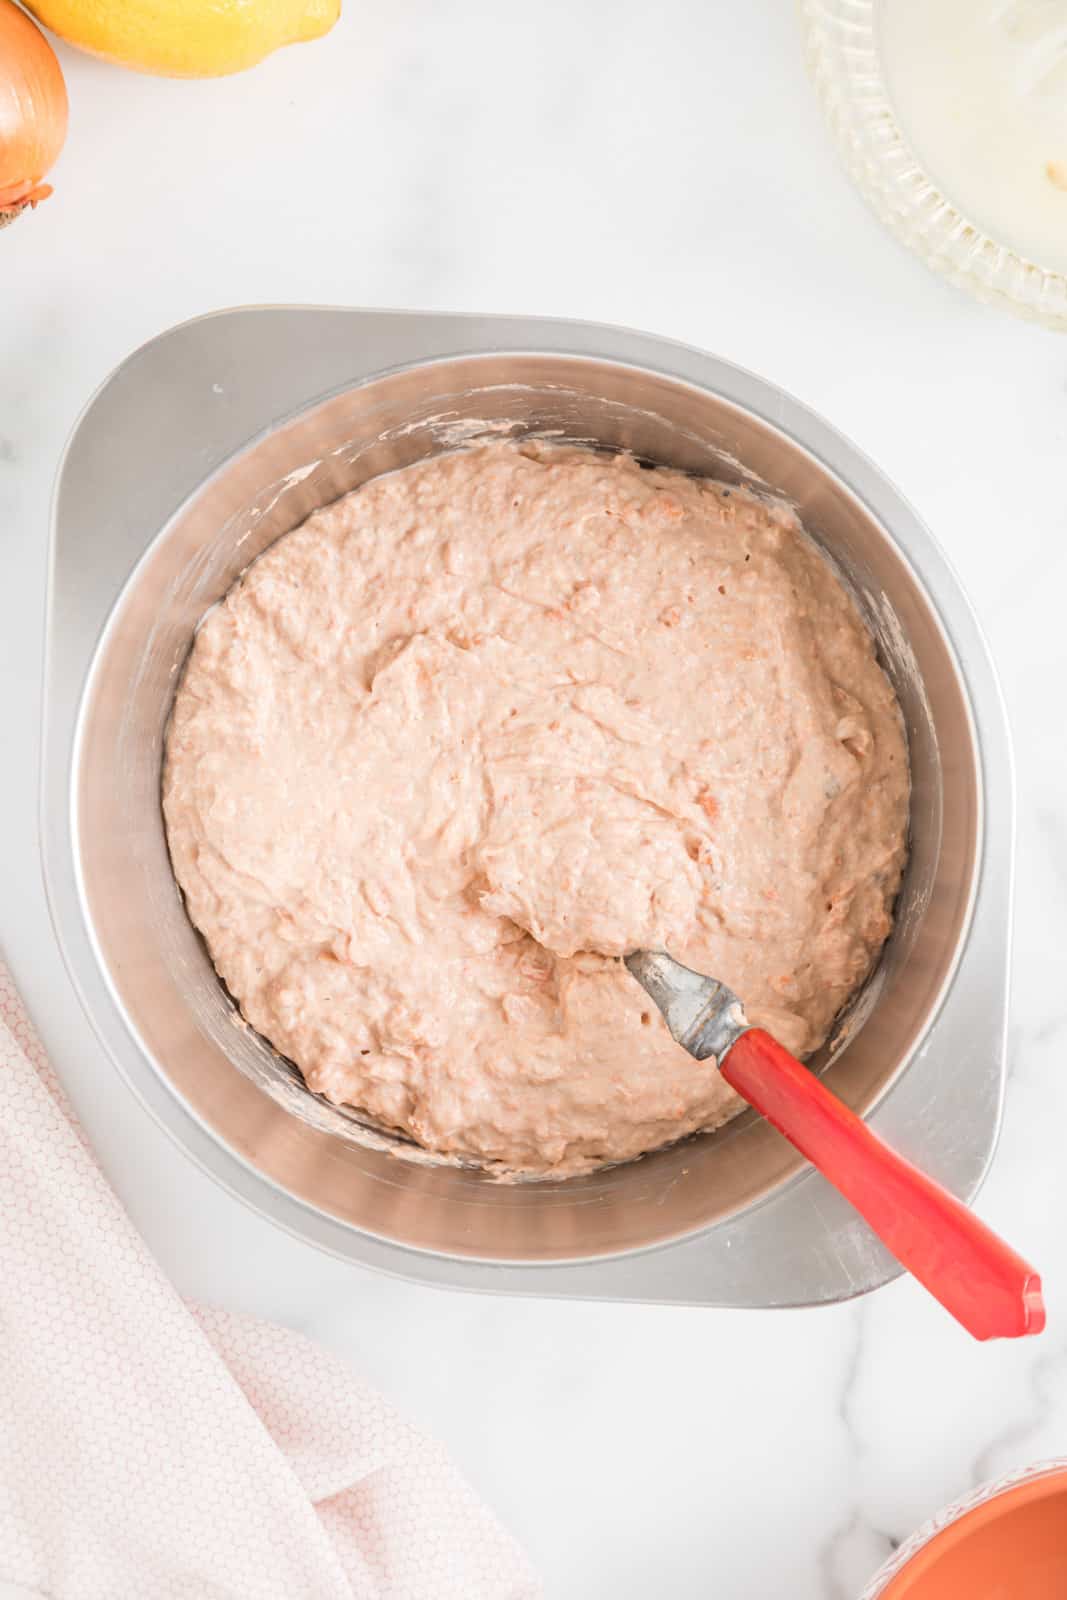 Salmon mousse ingredients just mixed in a metal bowl.